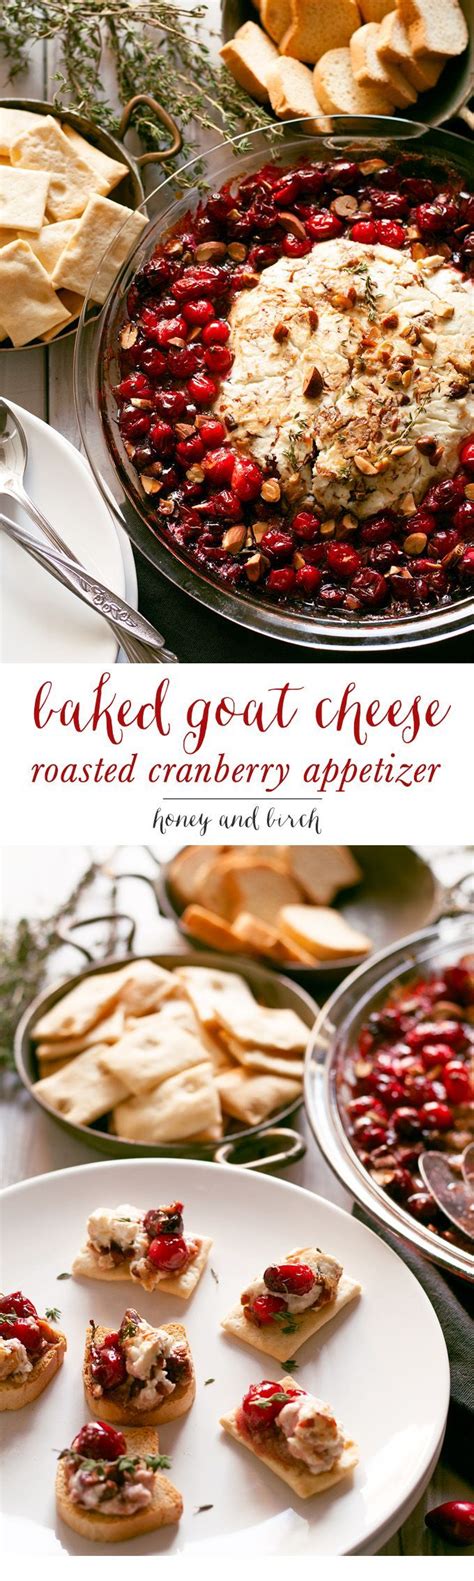 Baked Goat Cheese Roasted Cranberry Appetizer Recipe